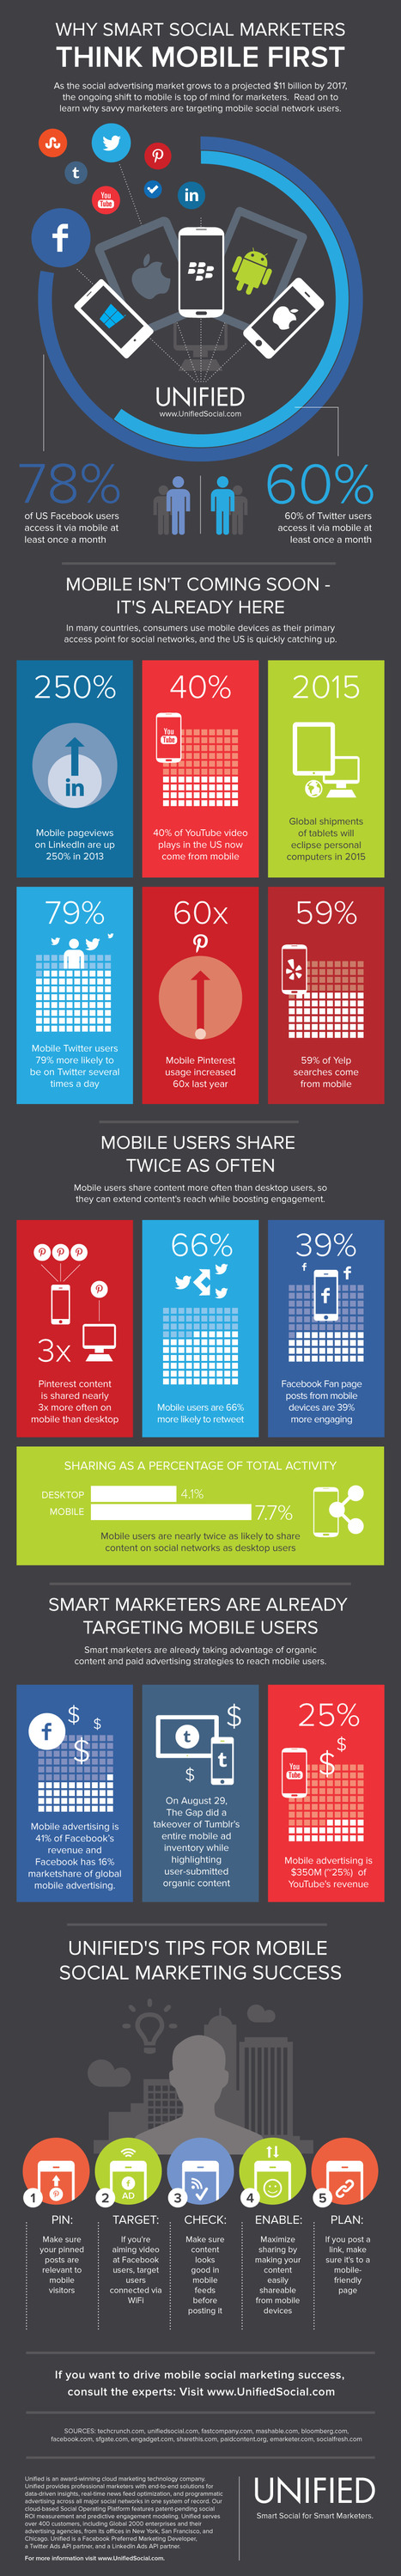 Why Smart Social Marketers Think Mobile First | mlearn | Scoop.it